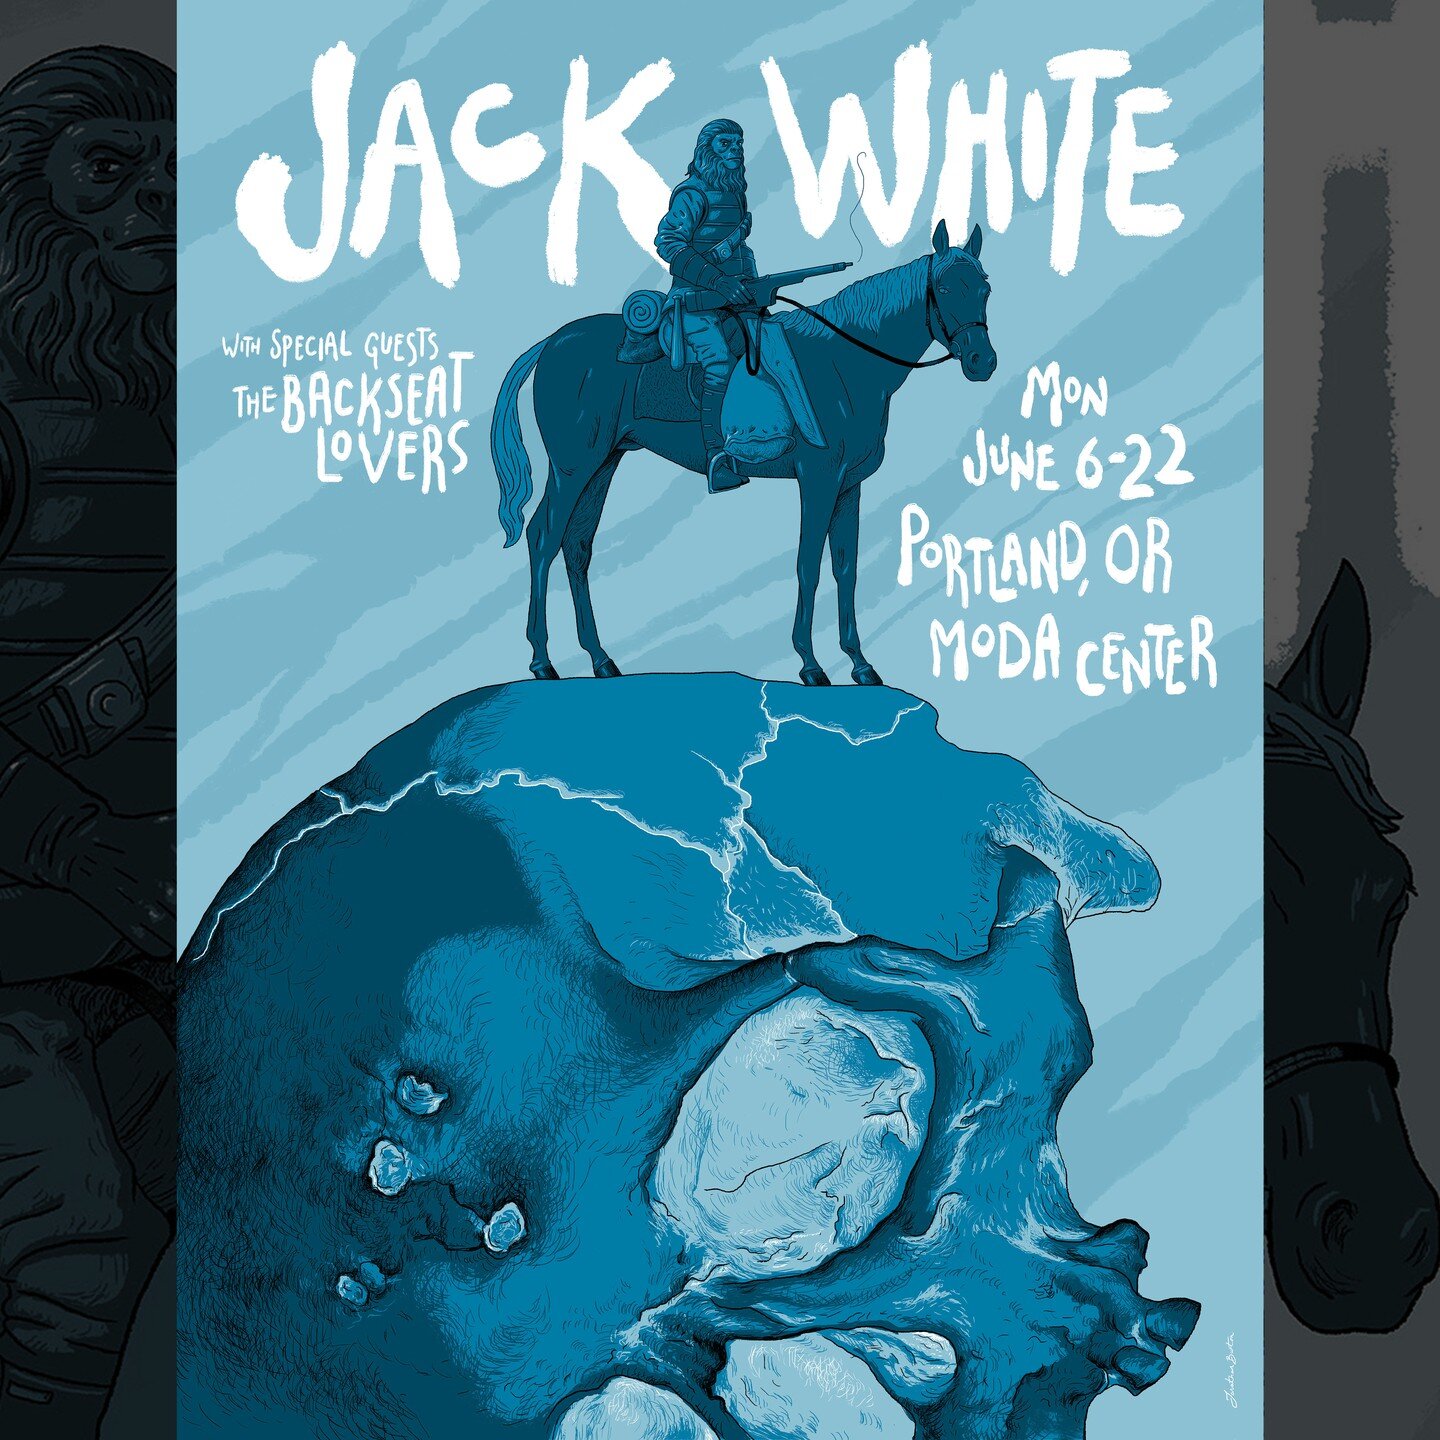 A huge pleasure to create this gig poster for @officialjackwhite thanks to @animalrummy.

Available at tonight's concert in Portland.

Printed by @ladylazarustx